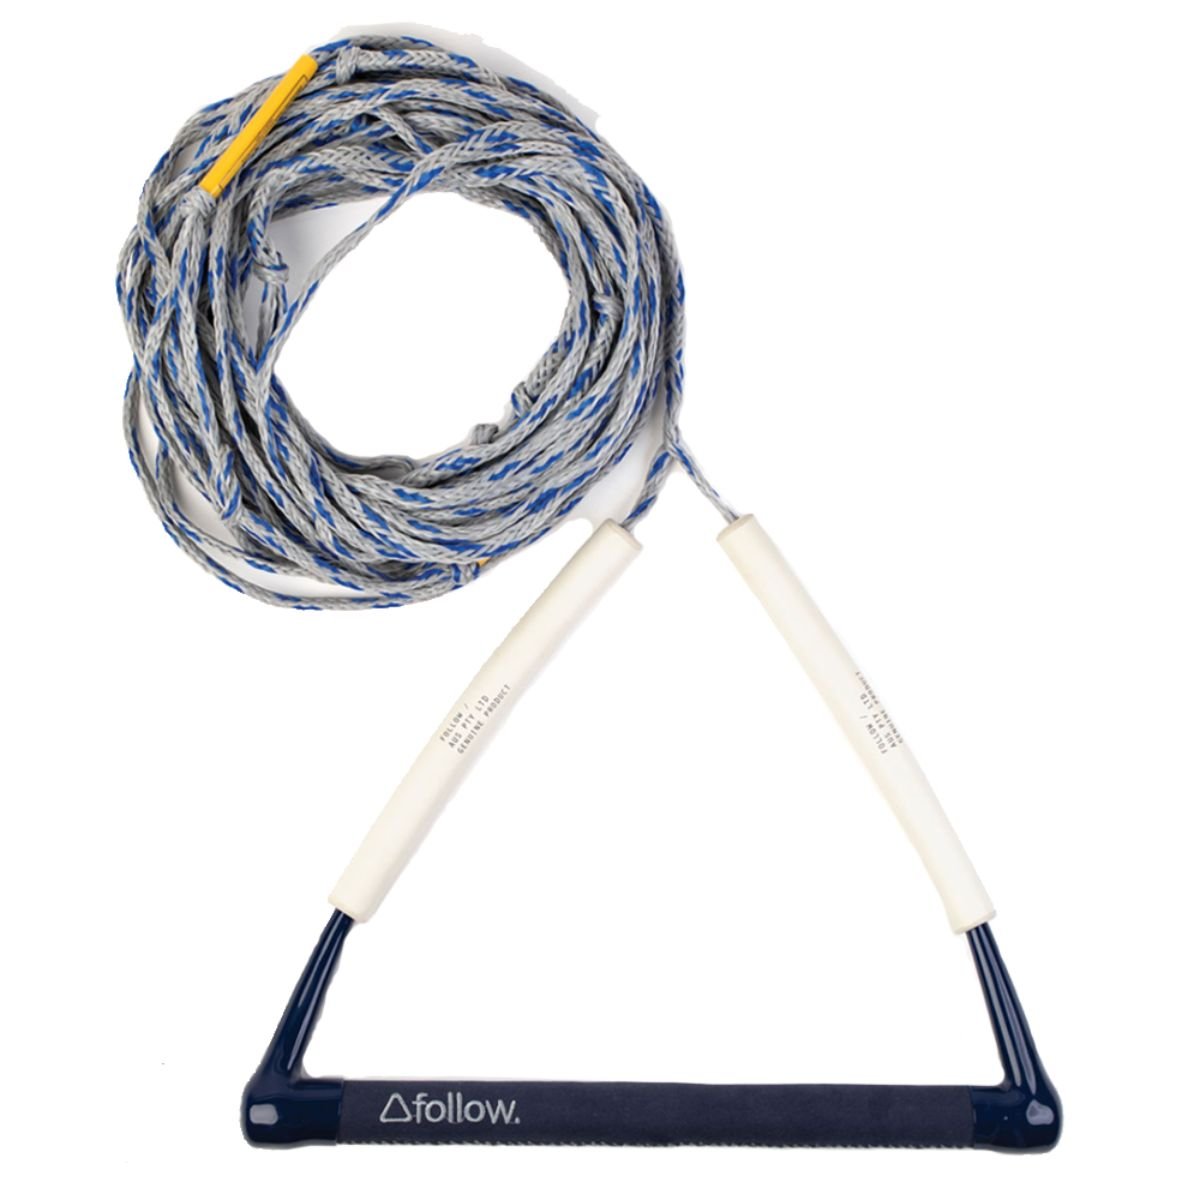 Follow The Basic Package Rope in Navy/Grey - BoardCo